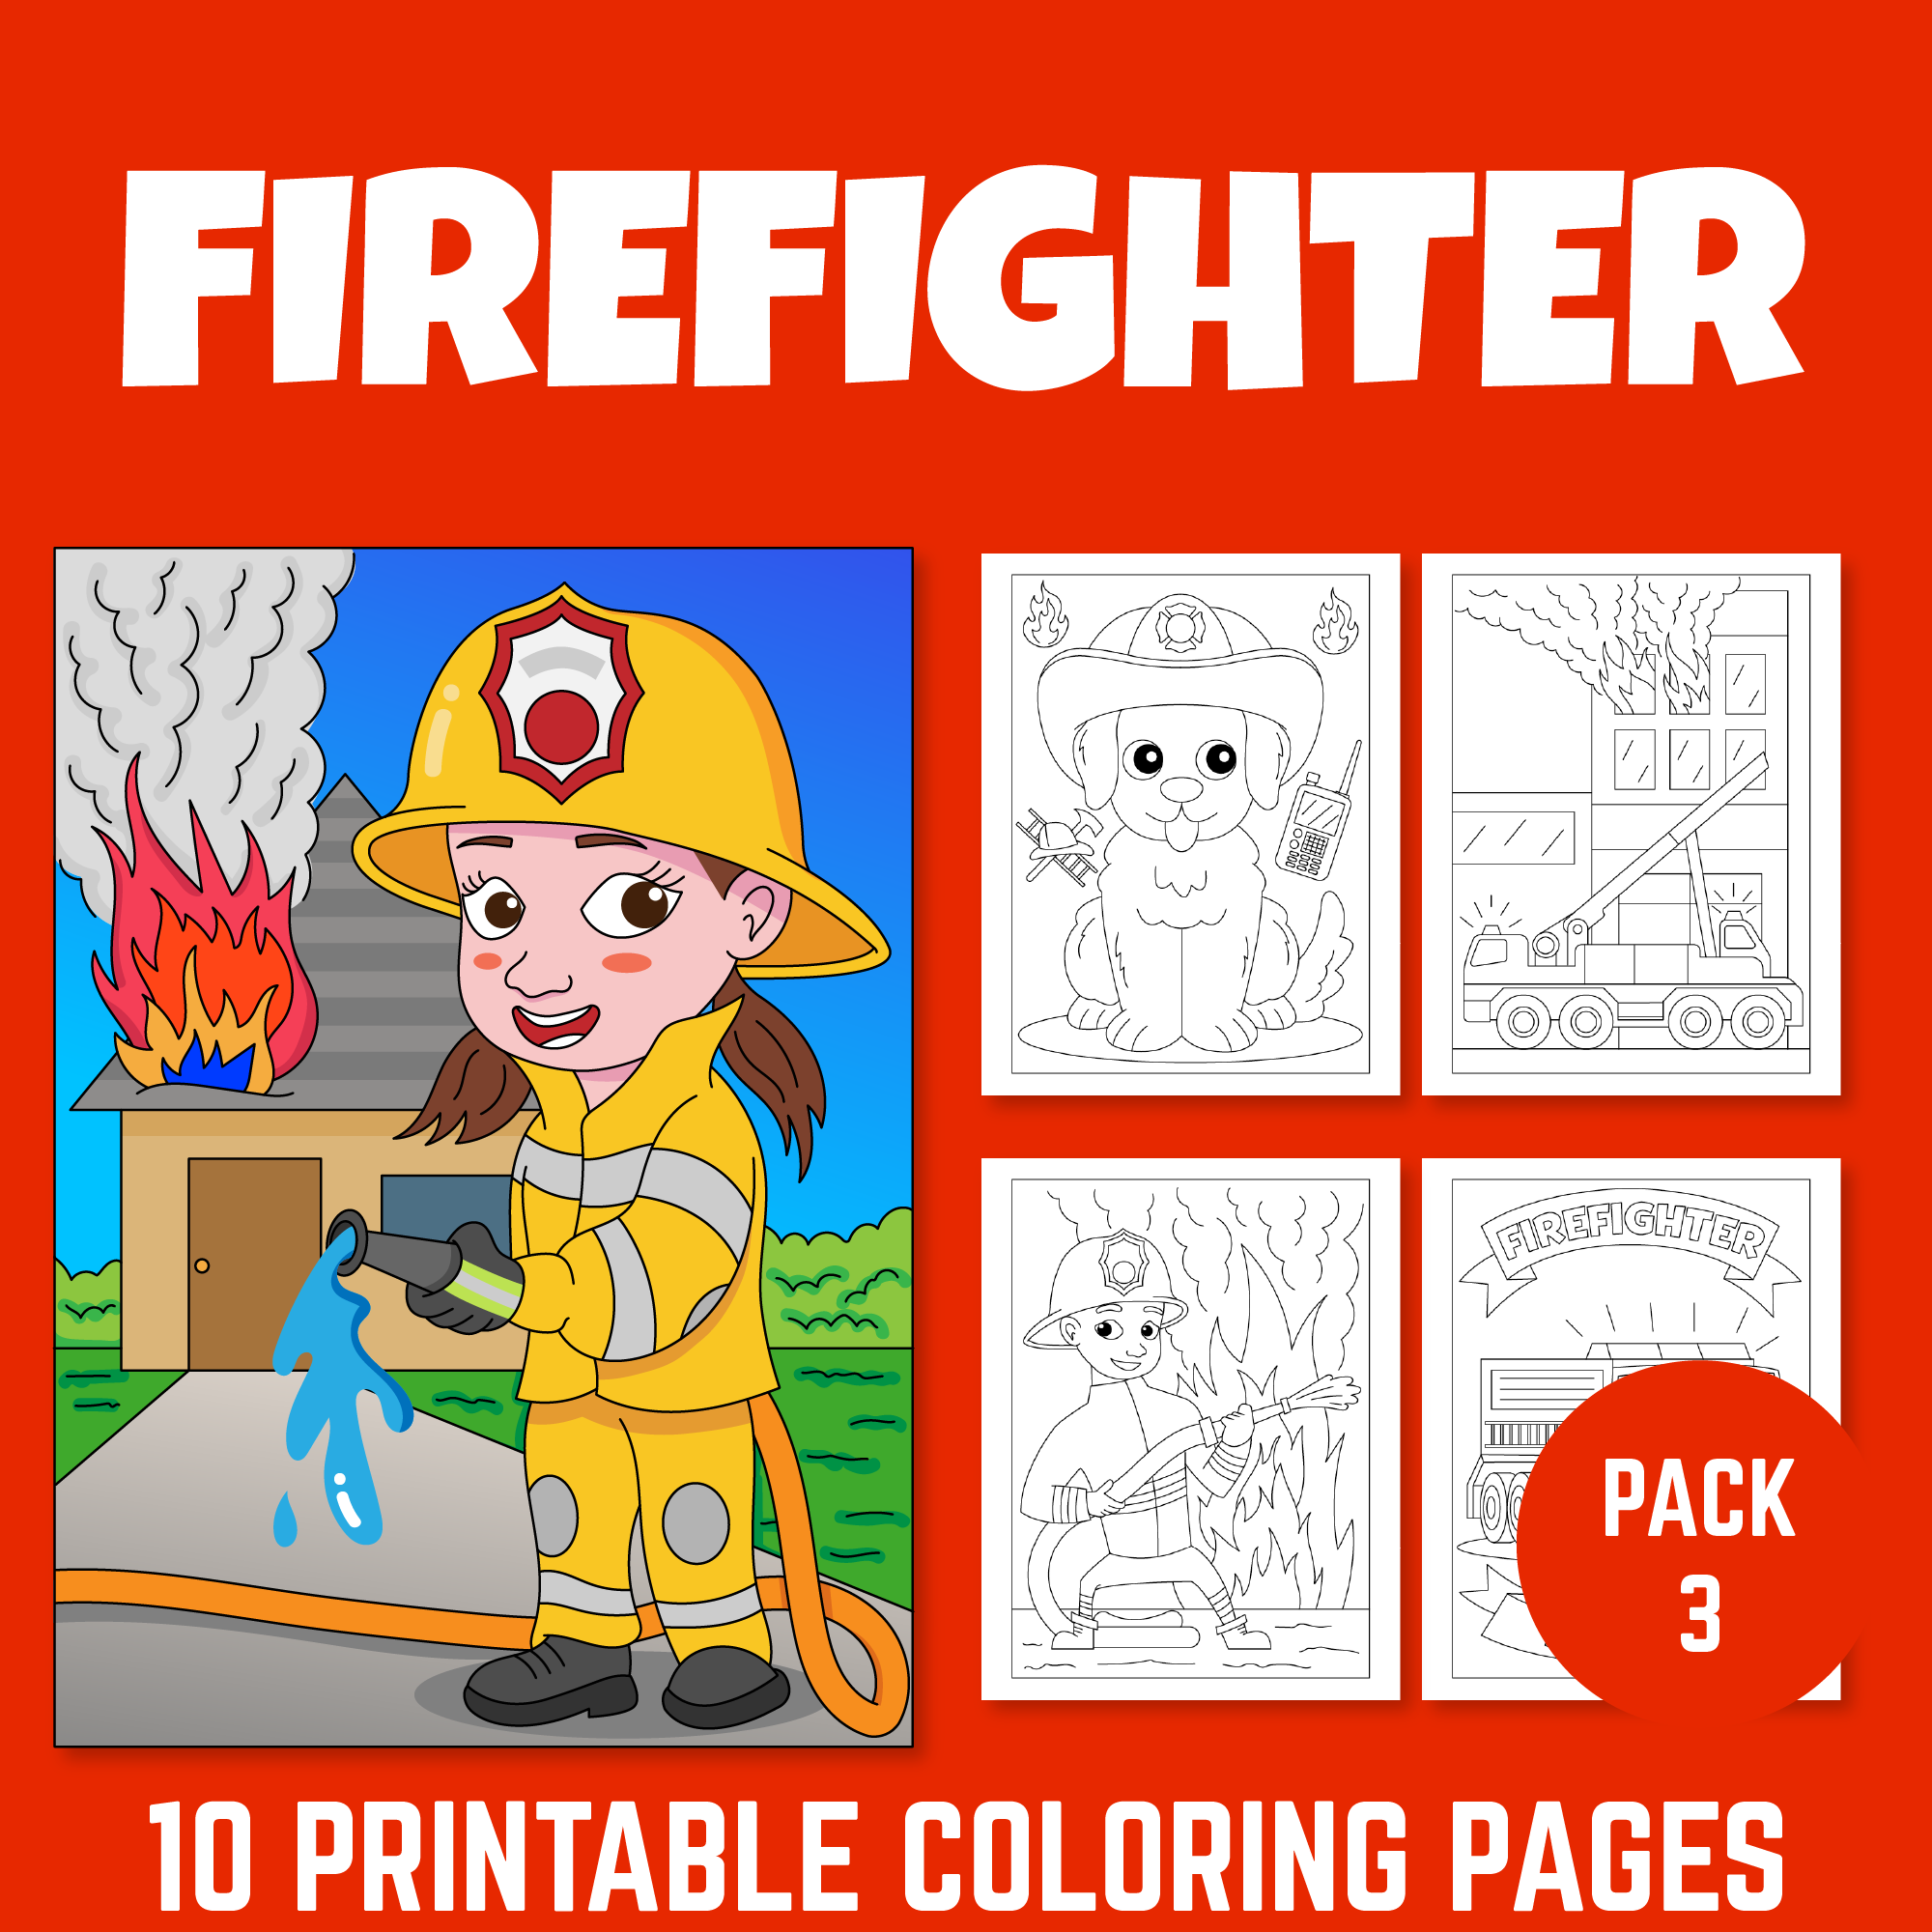 Firefighter coloring sheet pack for career explorati